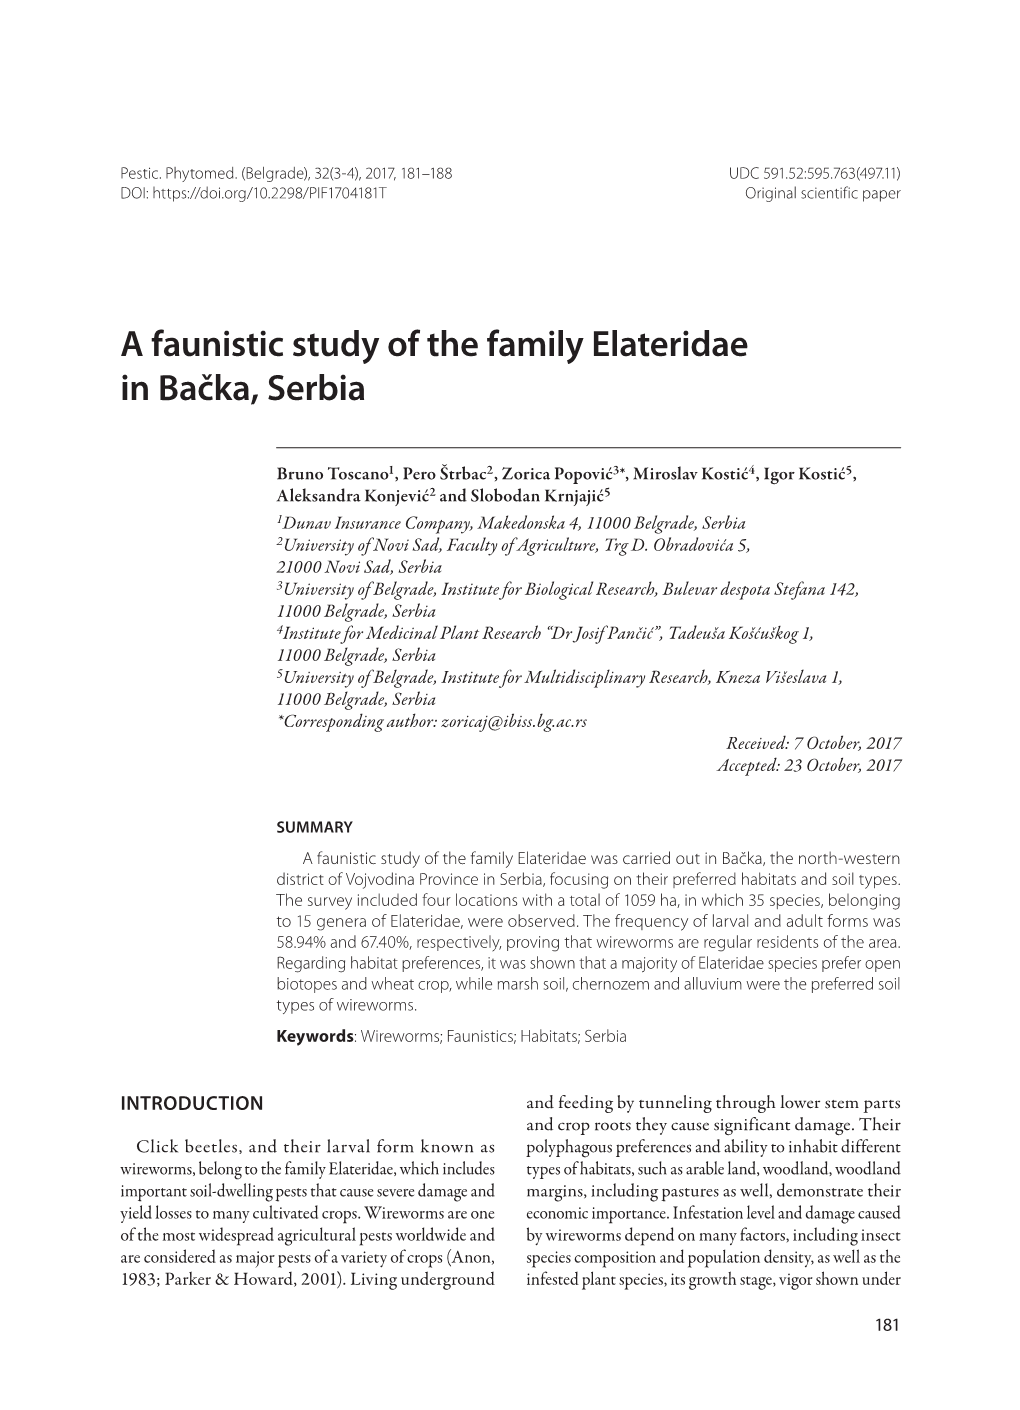 A Faunistic Study of the Family Elateridae in Bačka, Serbia